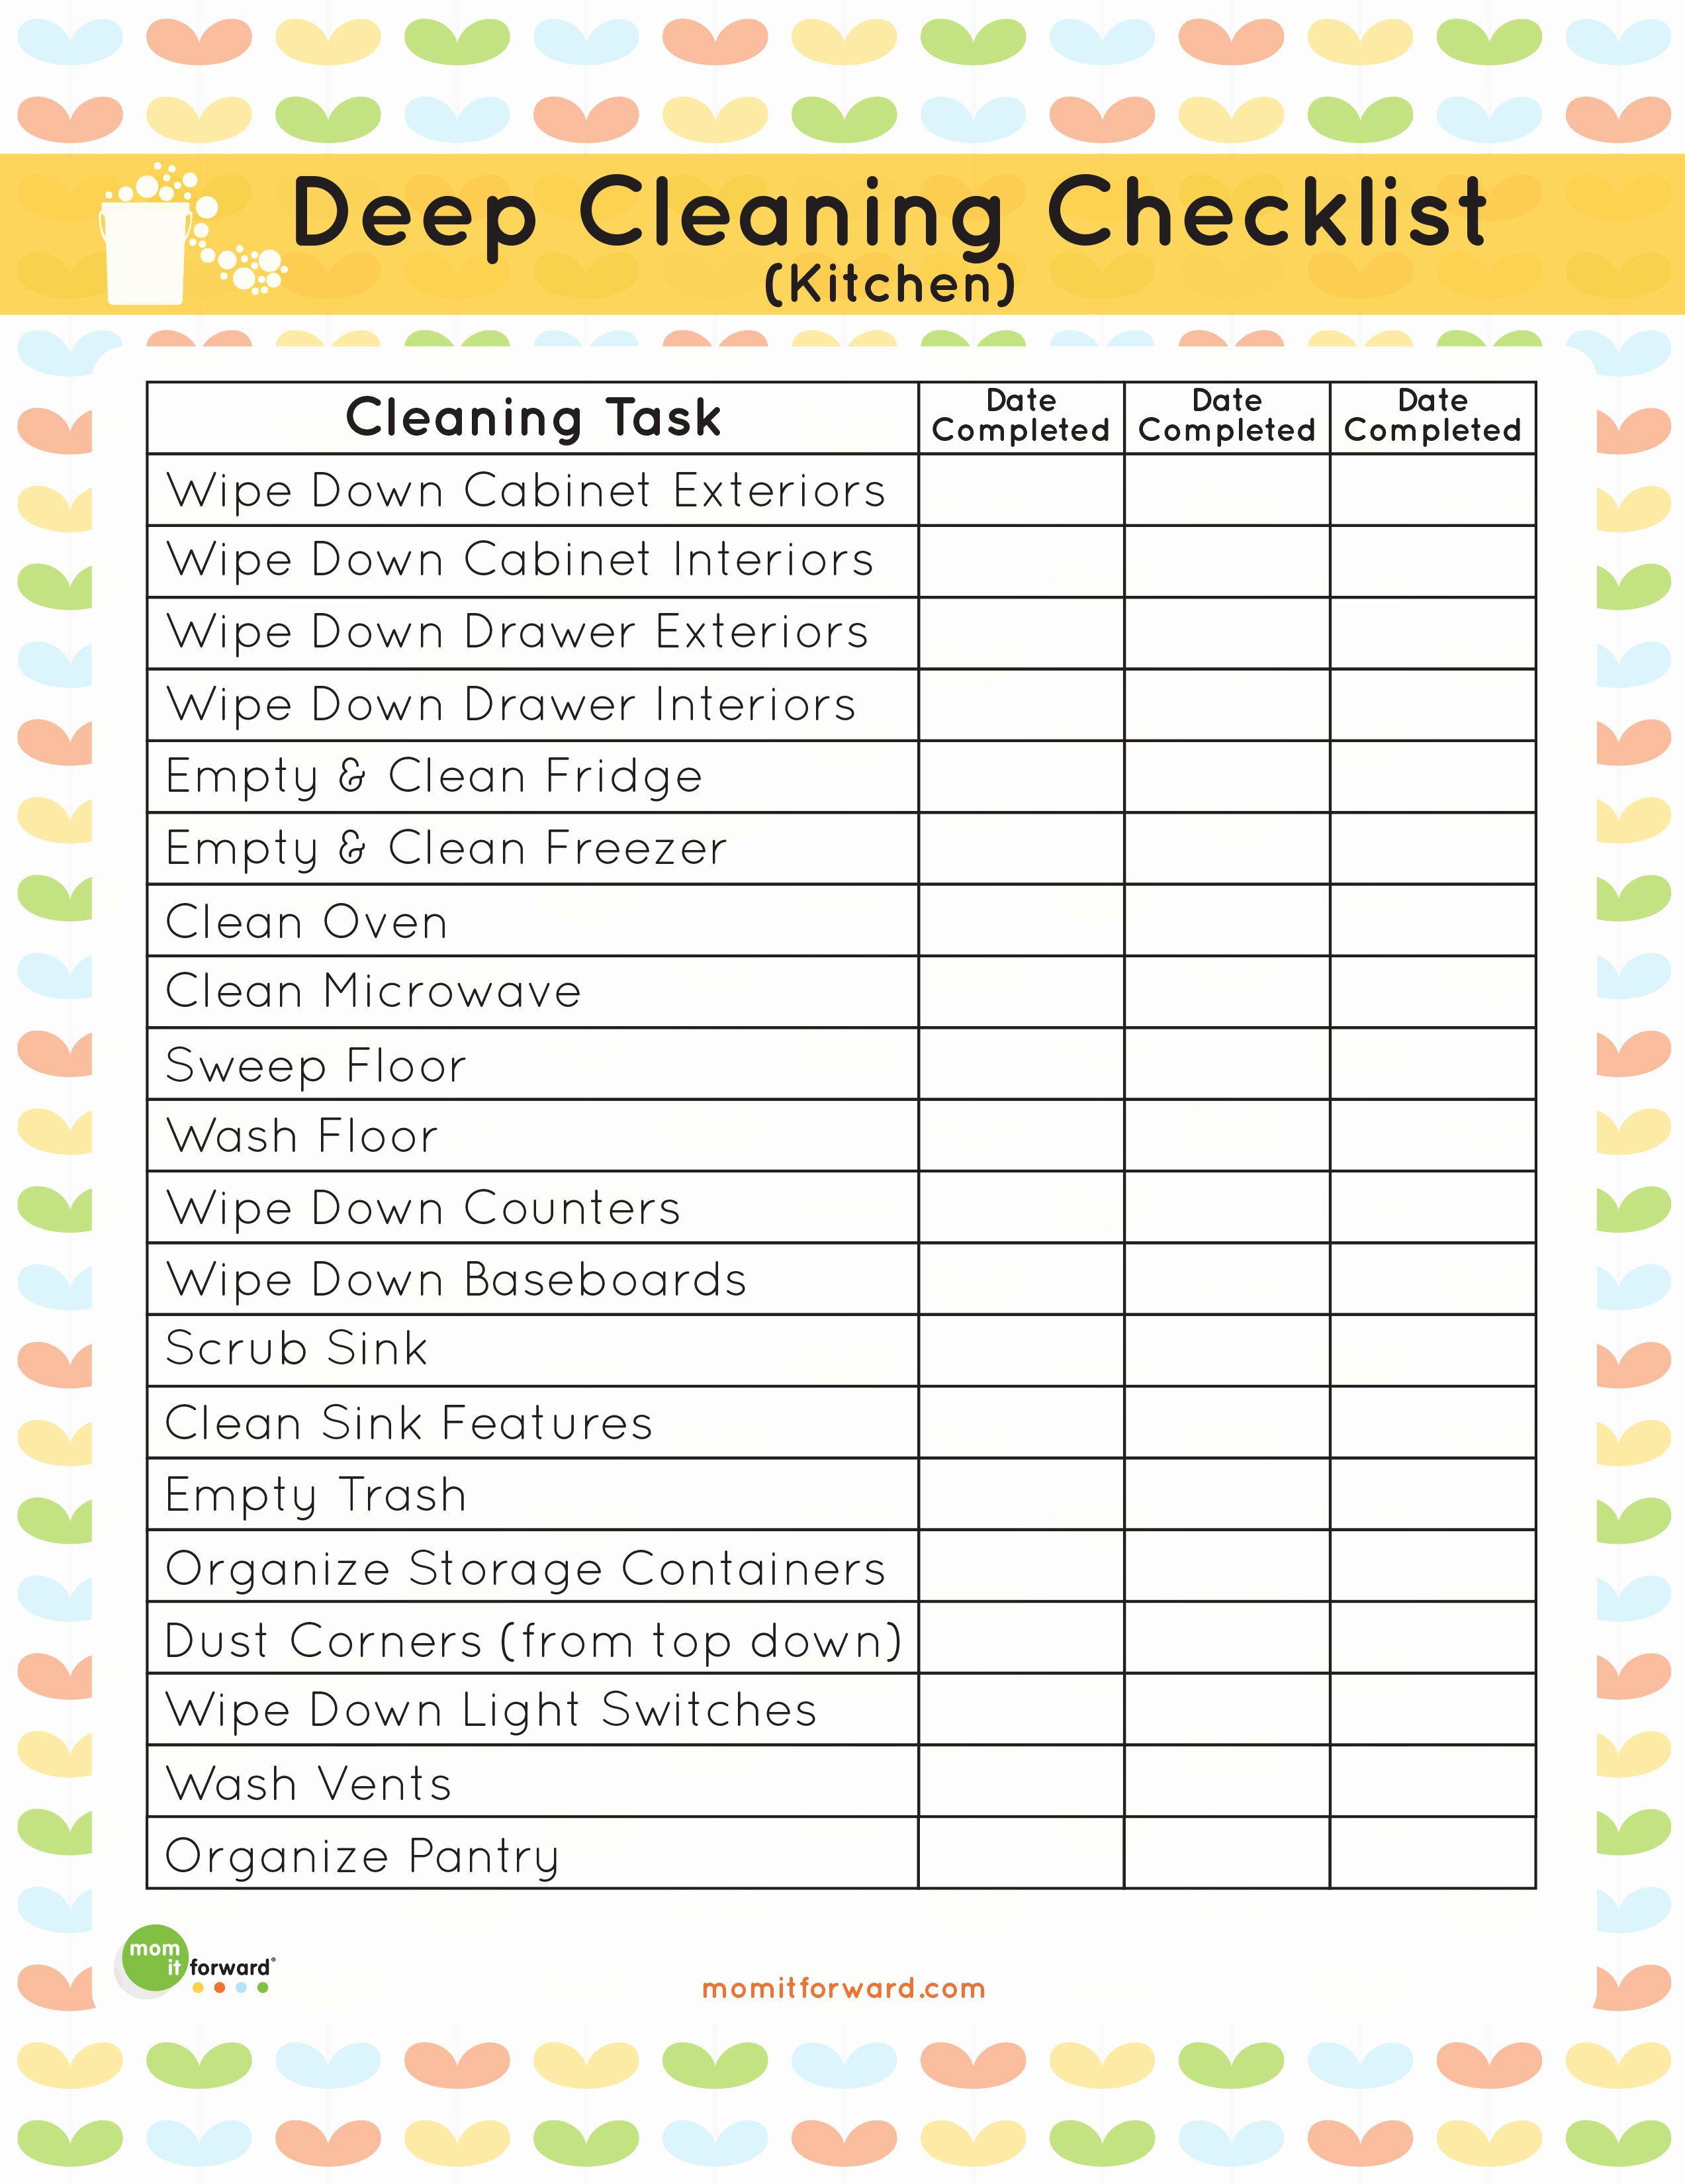 Free Restaurant Cleaning Checklist Template Luxury Printable Kitchen Cleaning Checklist Mom It forwardmom